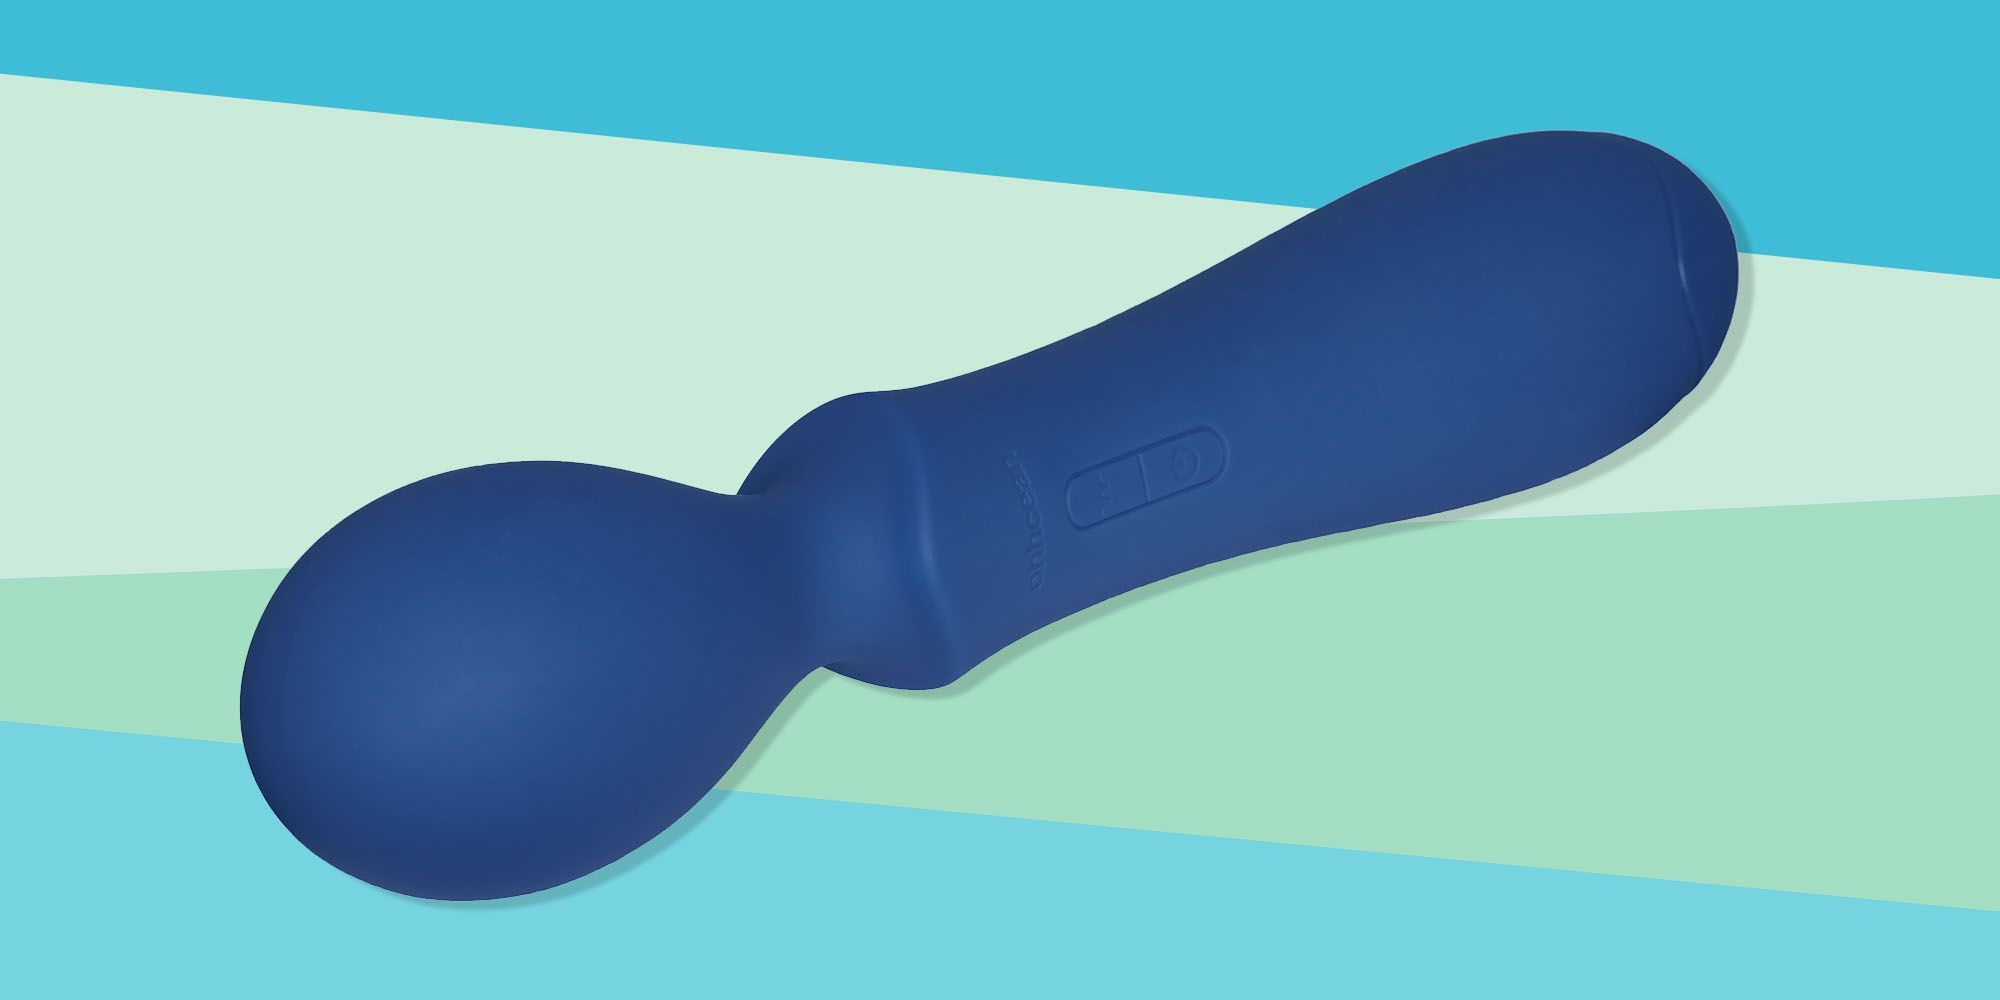 New Ohhcean sex toys are made from recycled ocean-bound plastics image pic